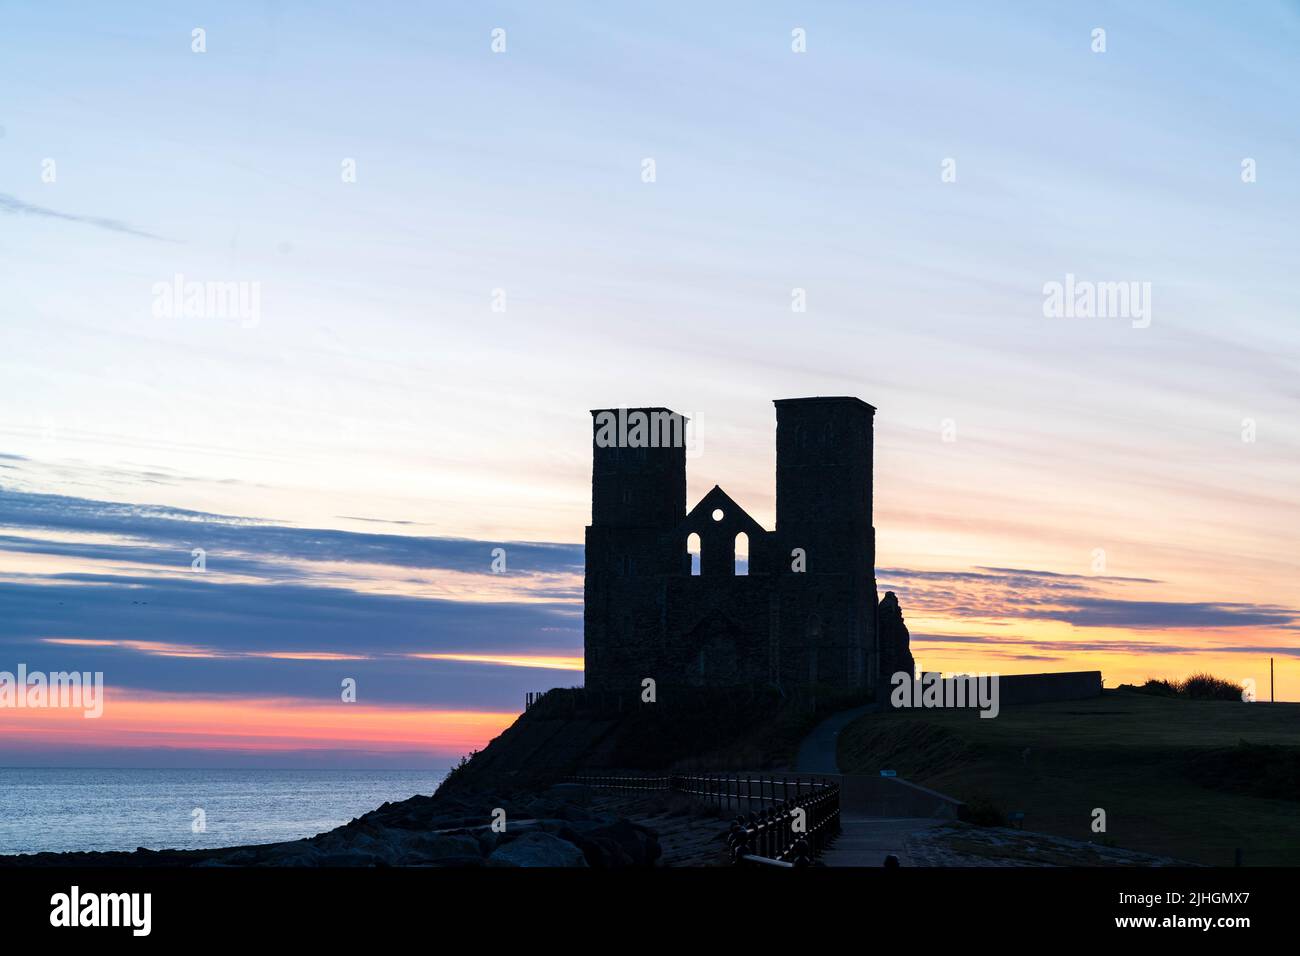 The dawn sky with the twin towers of the ruins of the 12th century church on the seafront at Reculver in Kent, England. Stock Photo